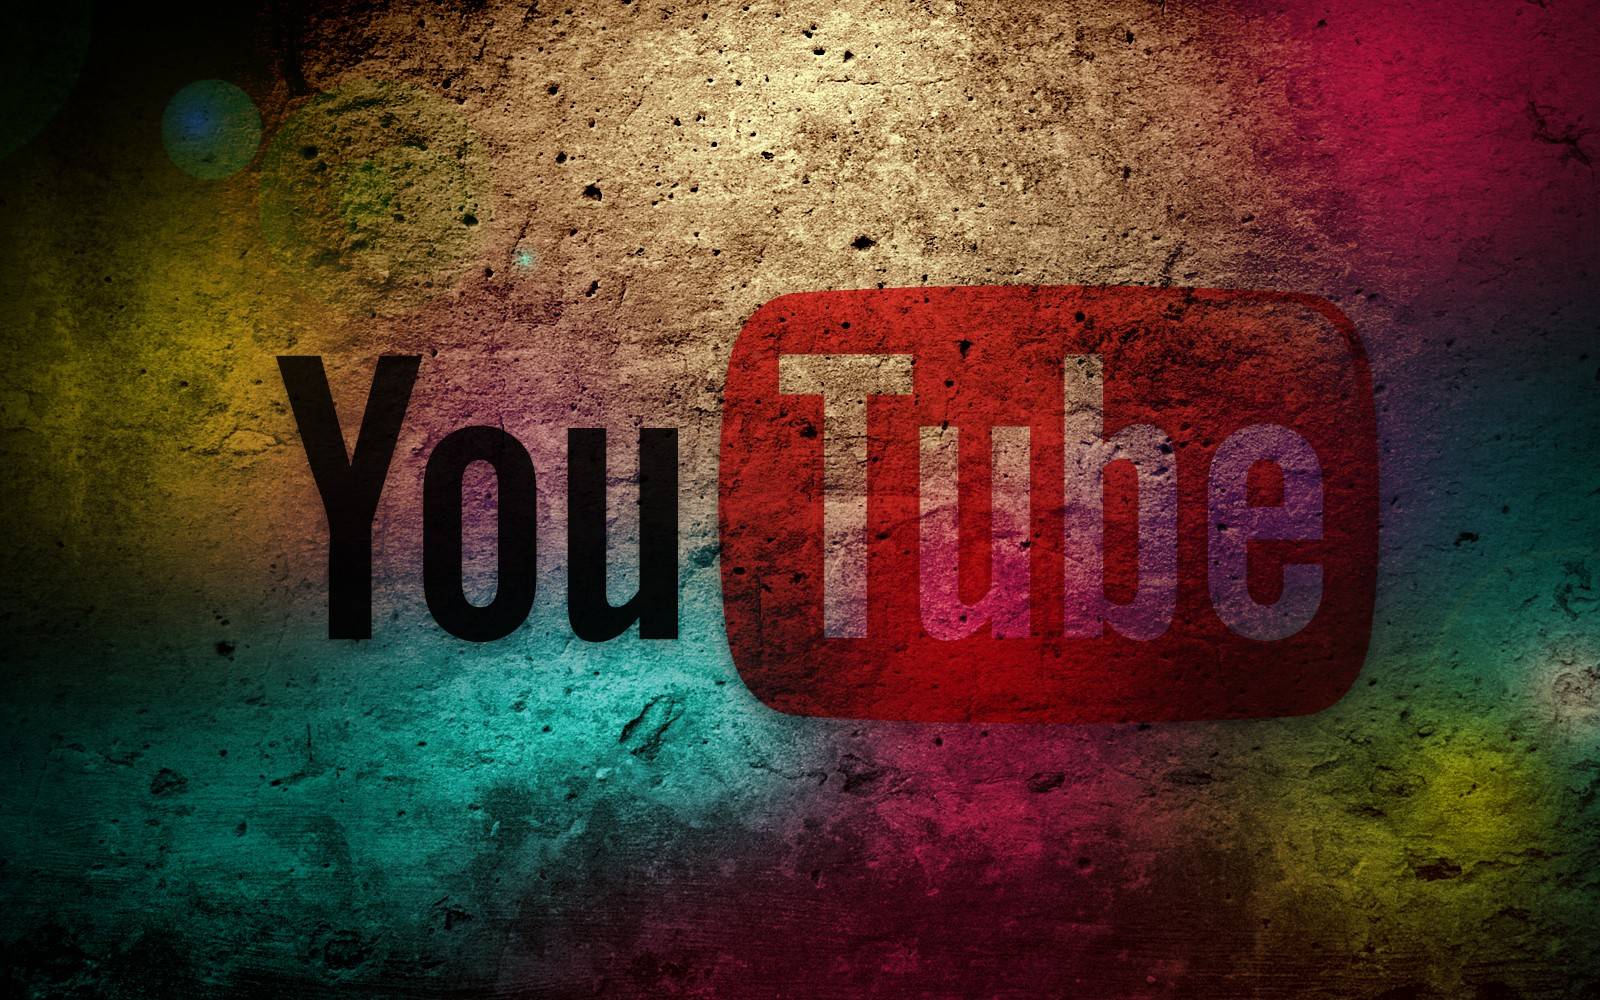 Youtube Wallpaper A Youtube wallpaper in different colors with the